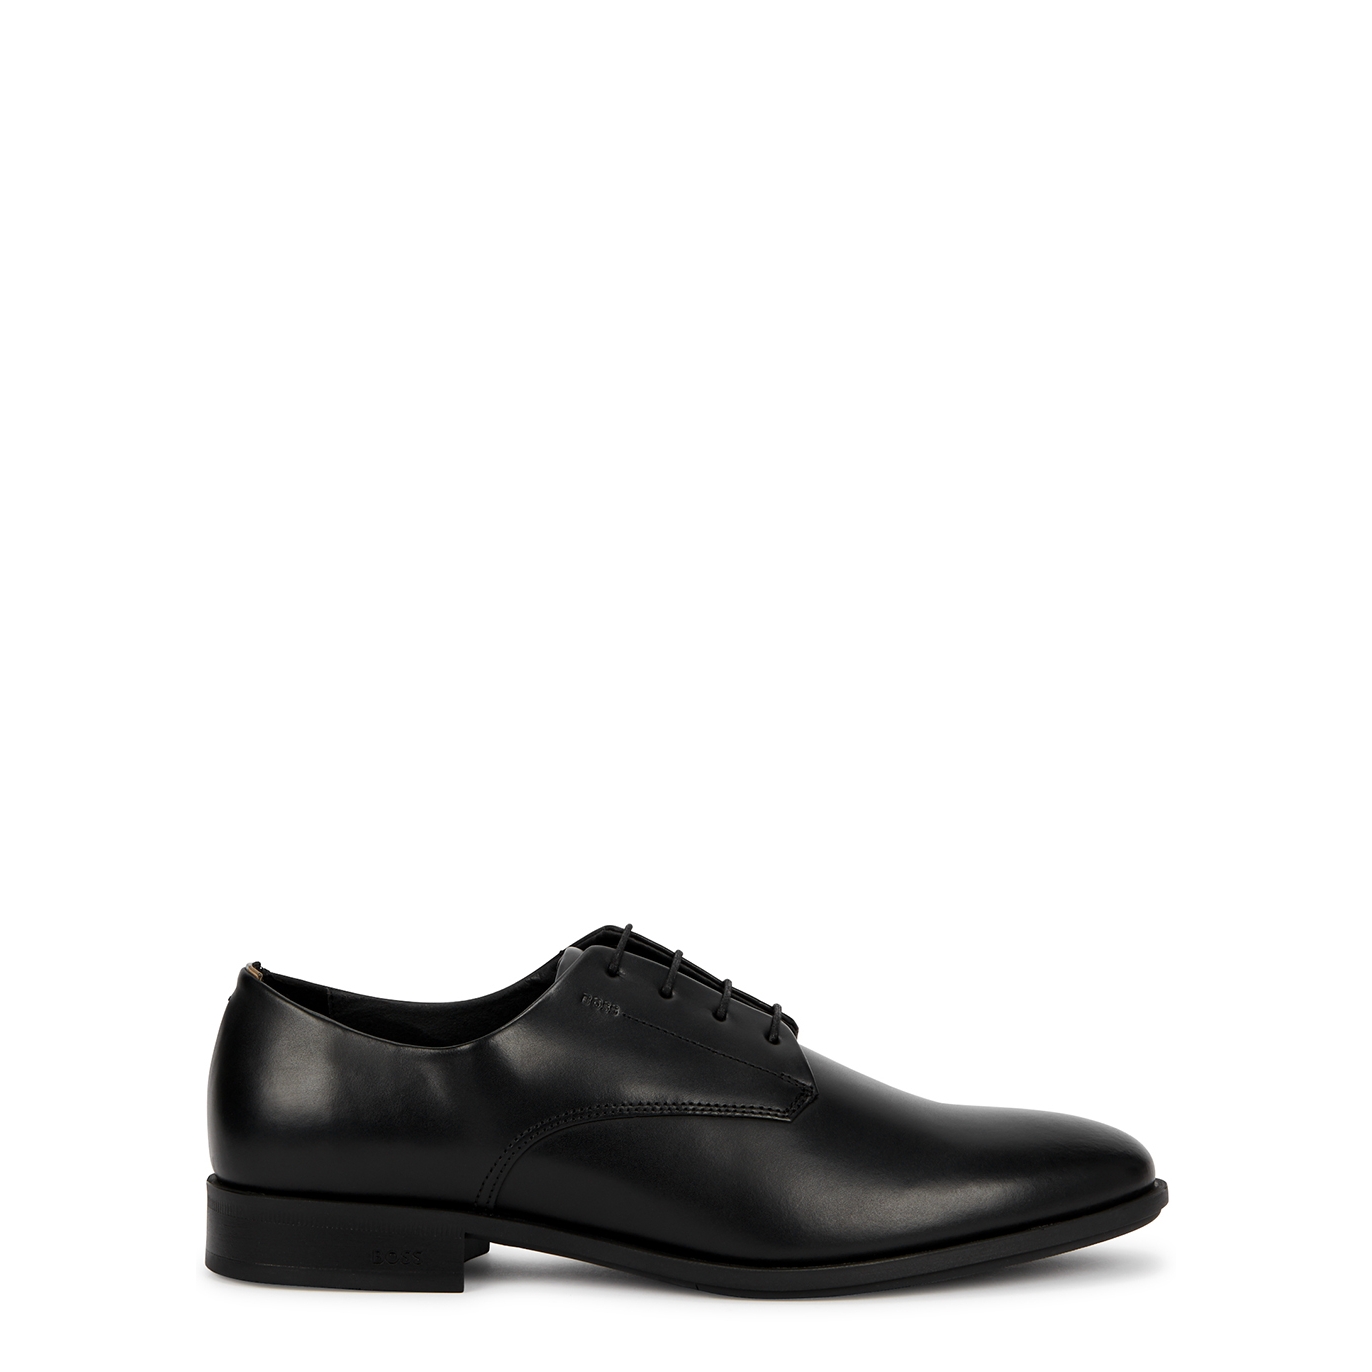 Boss Colby Leather Derby Shoes